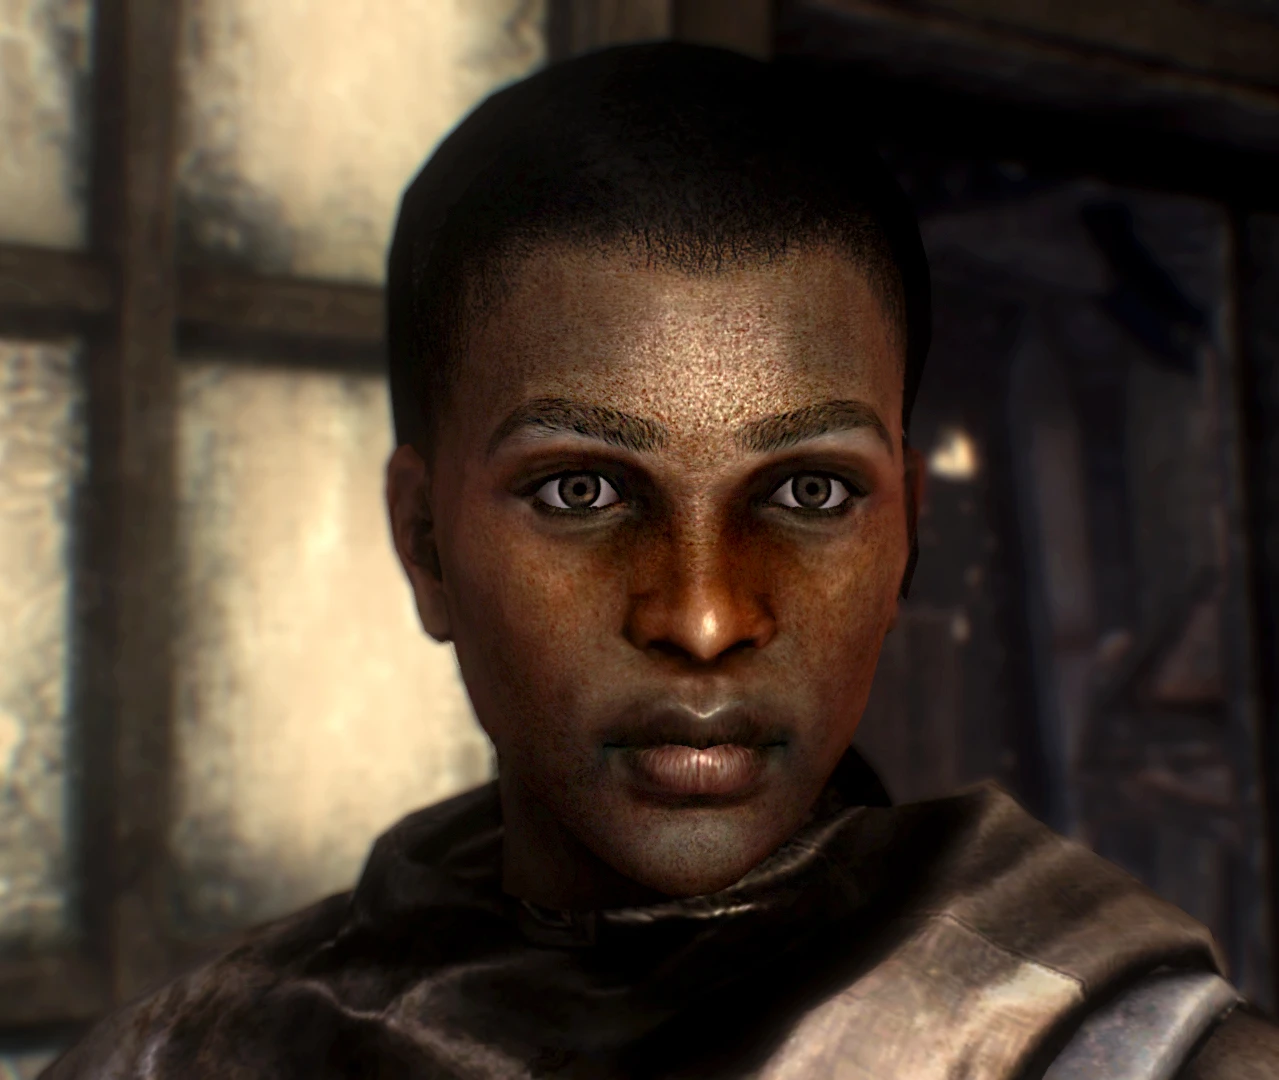 fallout new vegas character overhaul white face